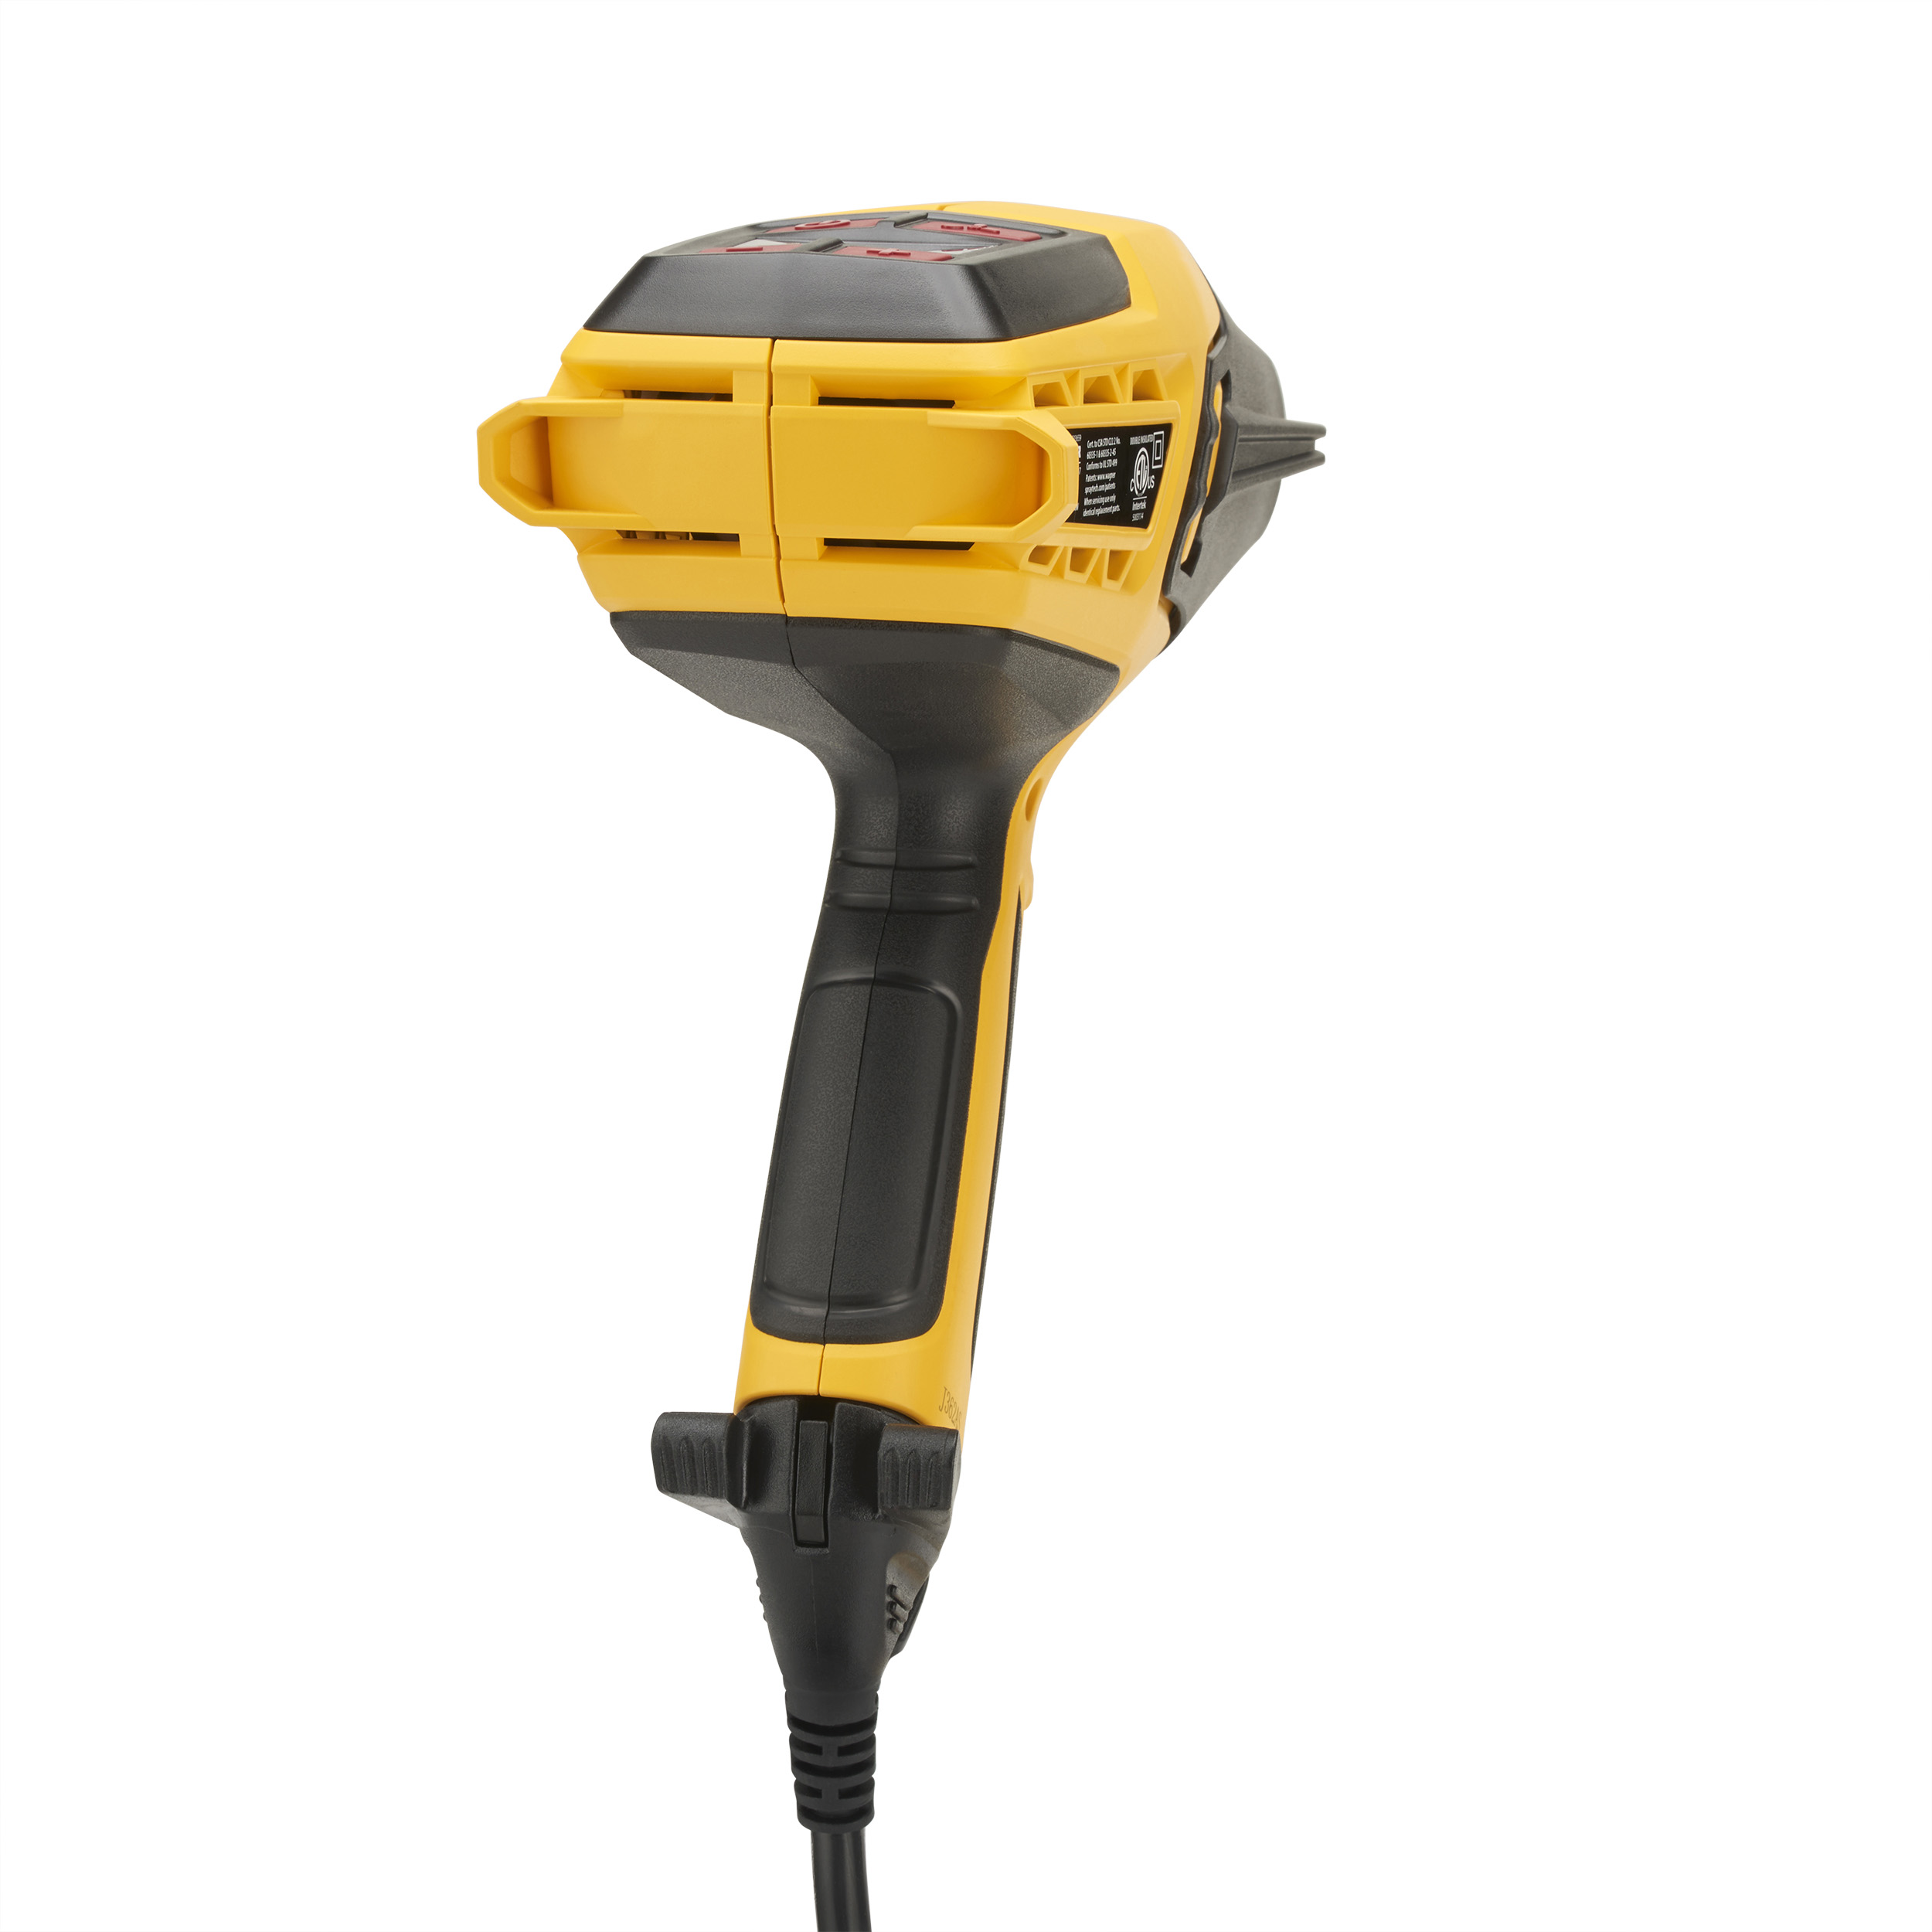 NEW Wagner Furno 500 Variable Tempurature Corded Heat Gun - tools - by  owner - sale - craigslist